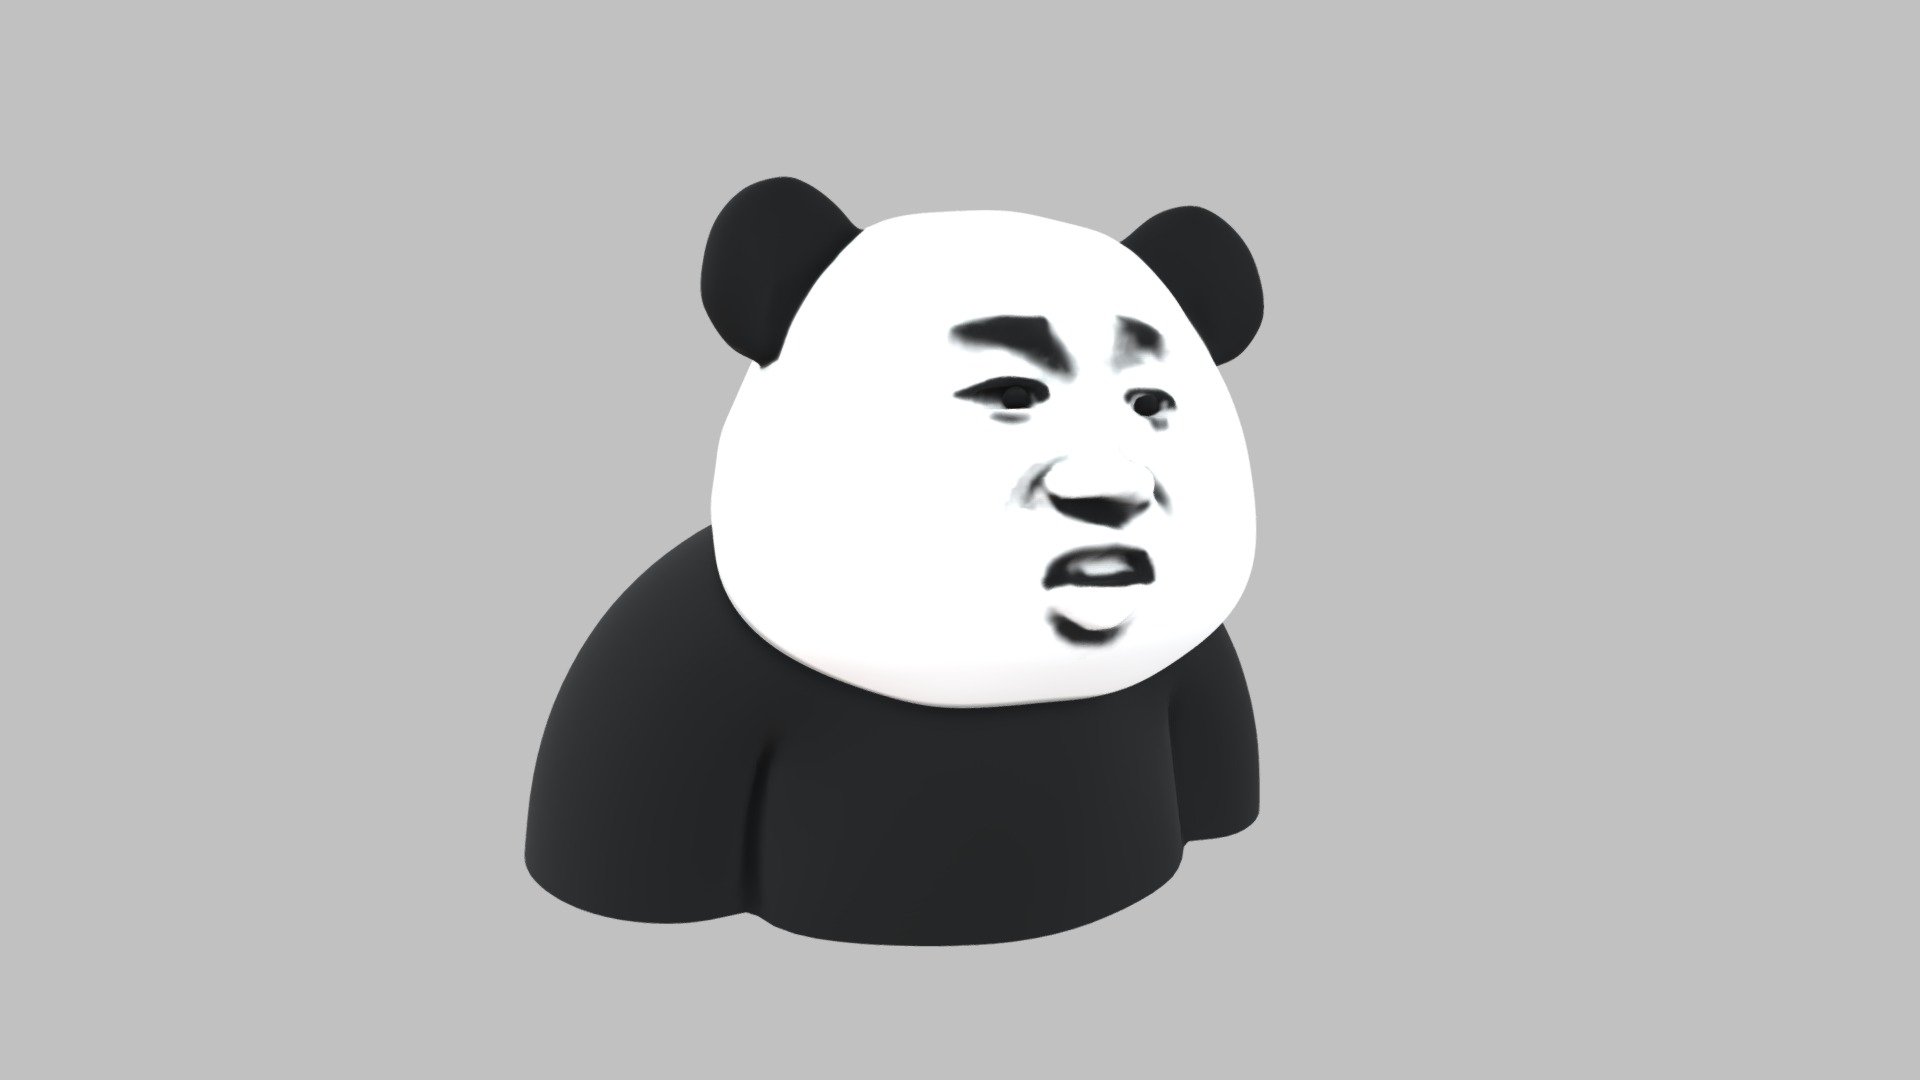 The most famous meme on the Internet in Chinese-speaking world!
Now it's 3D&hellip; - Panda head meme - Download Free 3D model by Asashino (@gaoran0623) 3d model